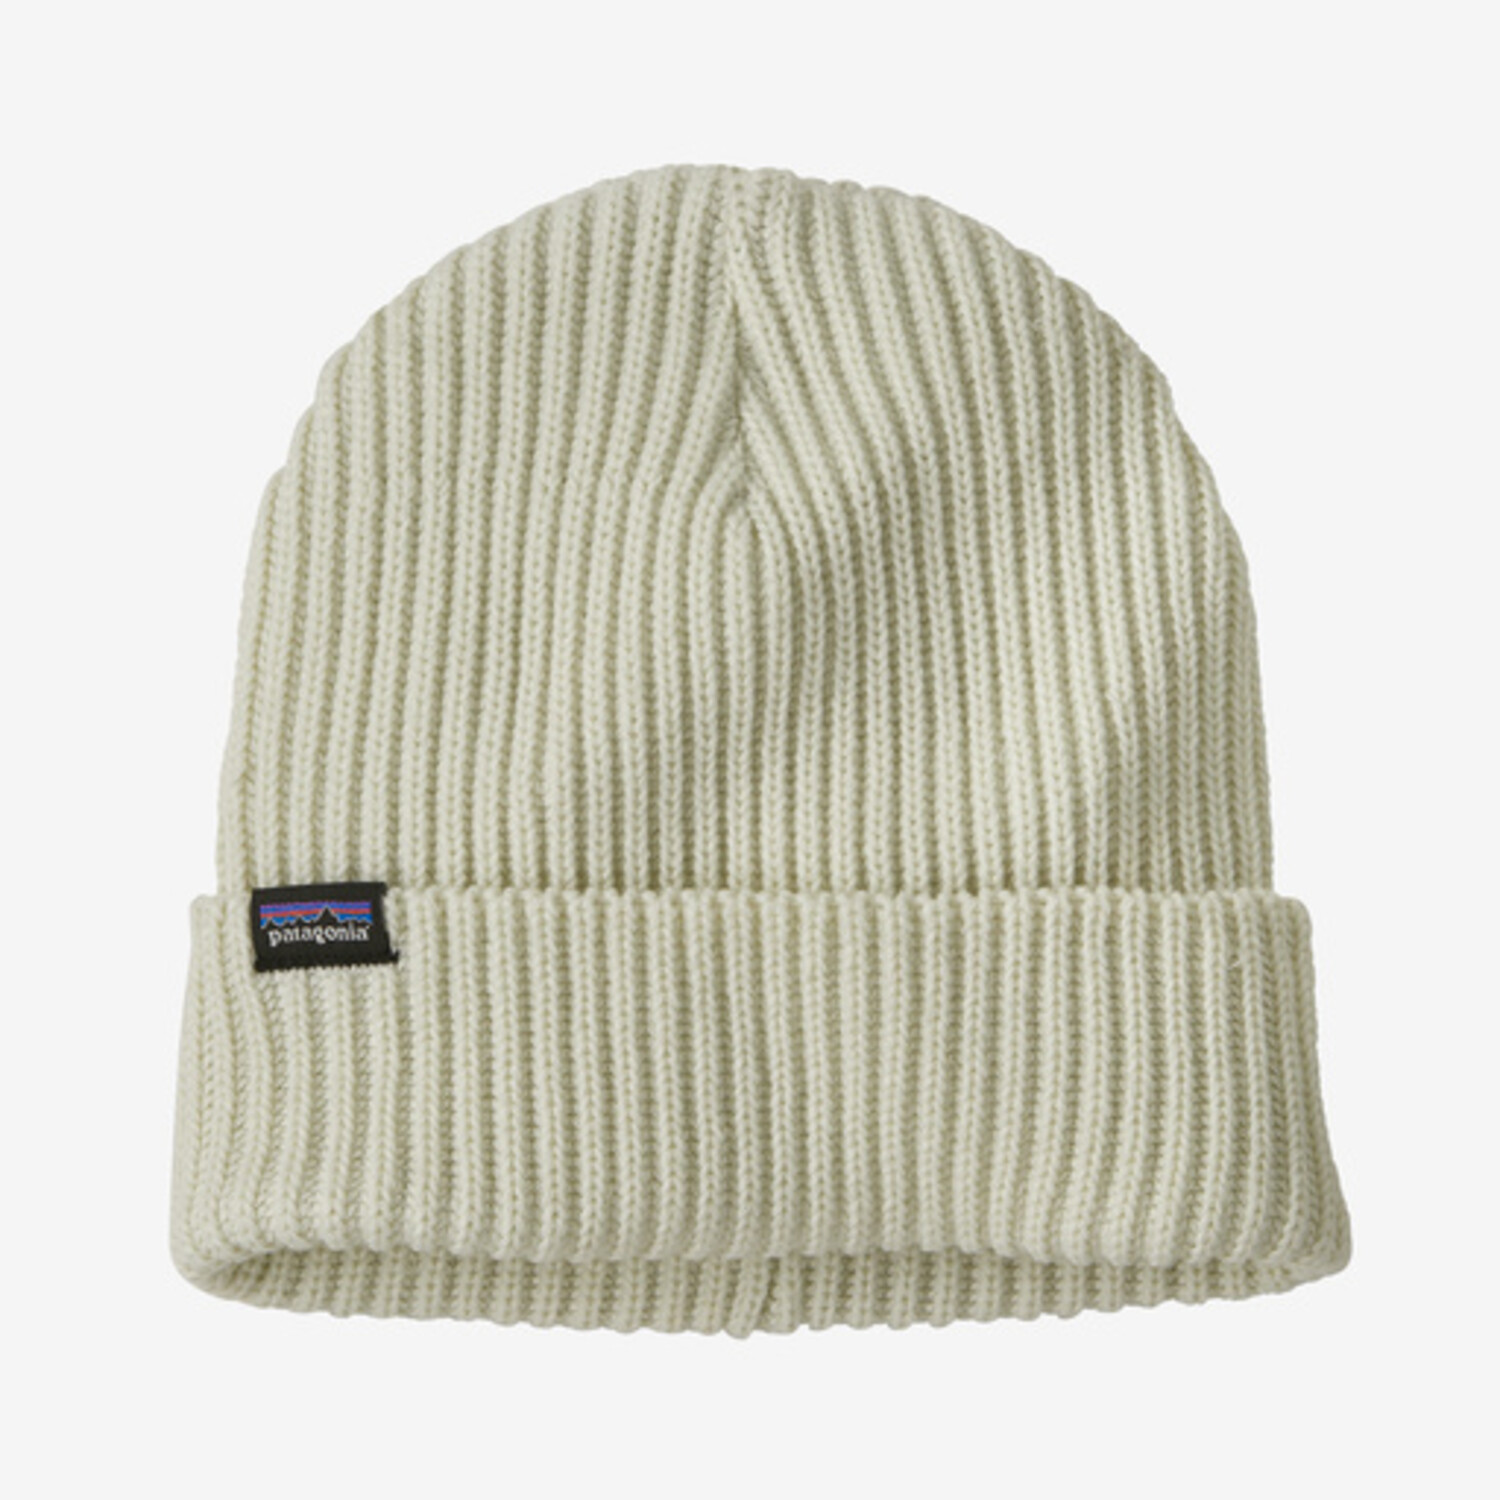 Patagonia Fishermans Rolled Beanie - BCW - Yellow Turtle